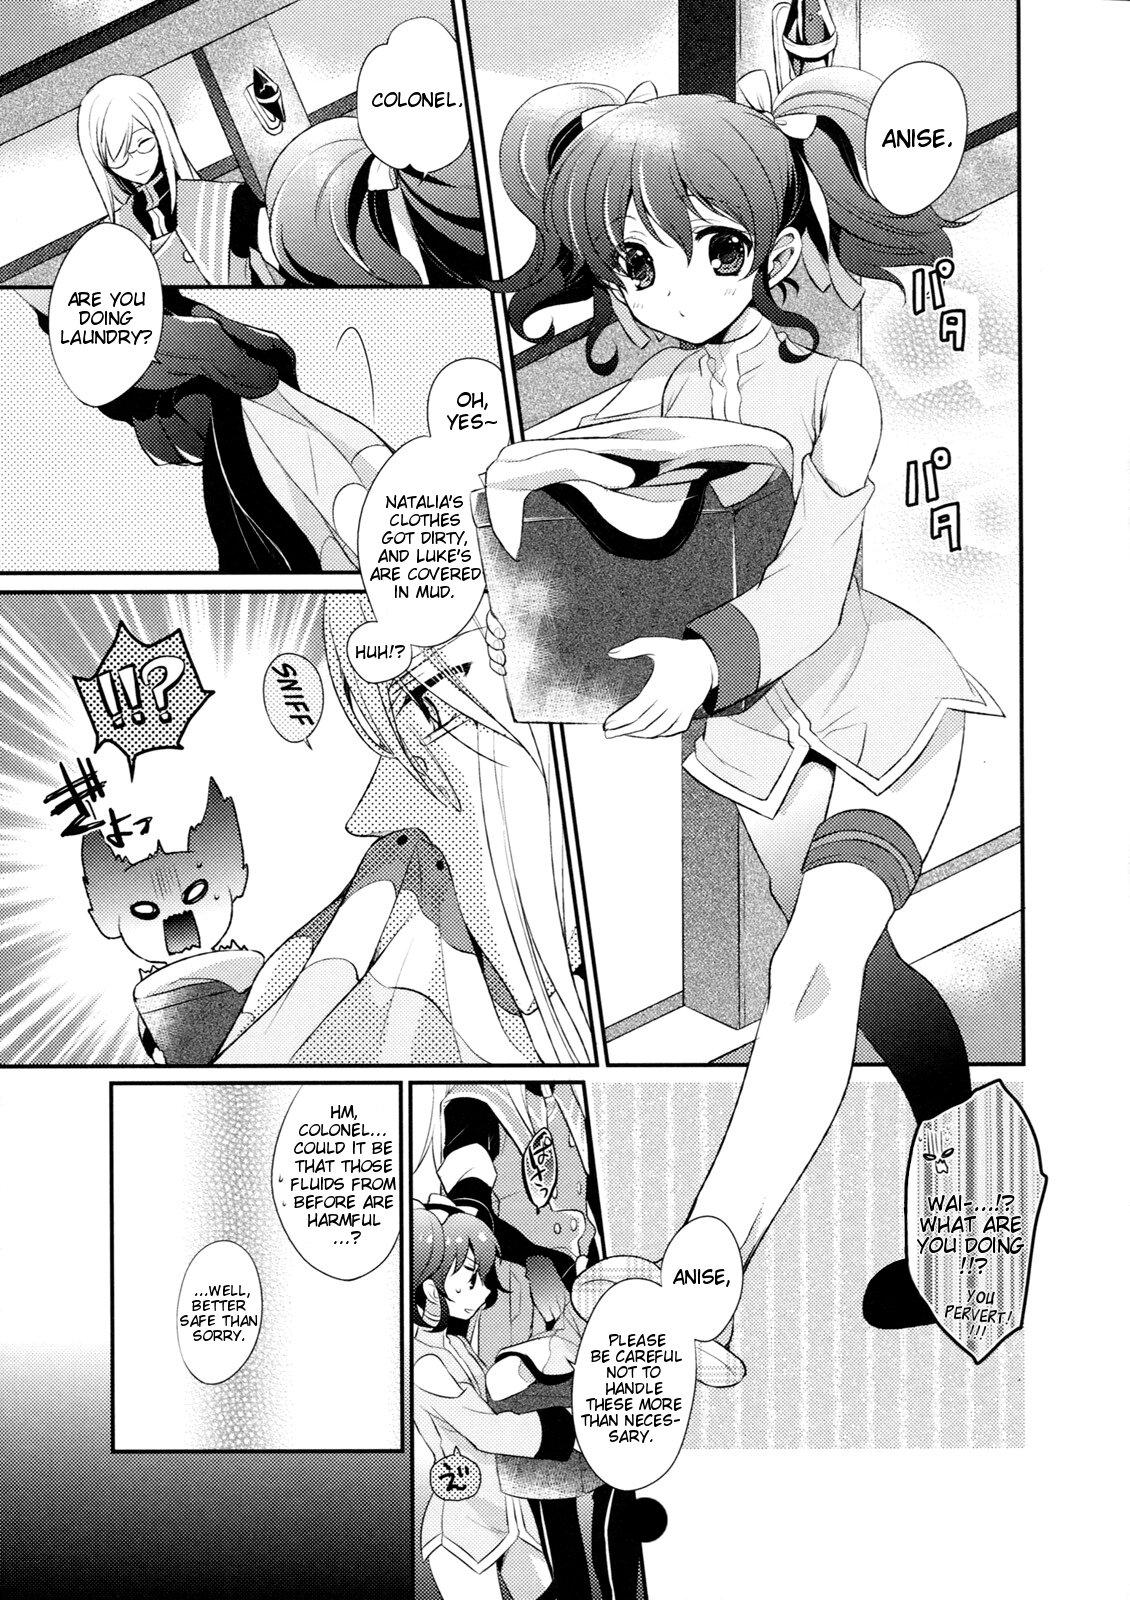 Hot Fuck Tropical Rainy - Tales of the abyss Amateur Teen - Page 7